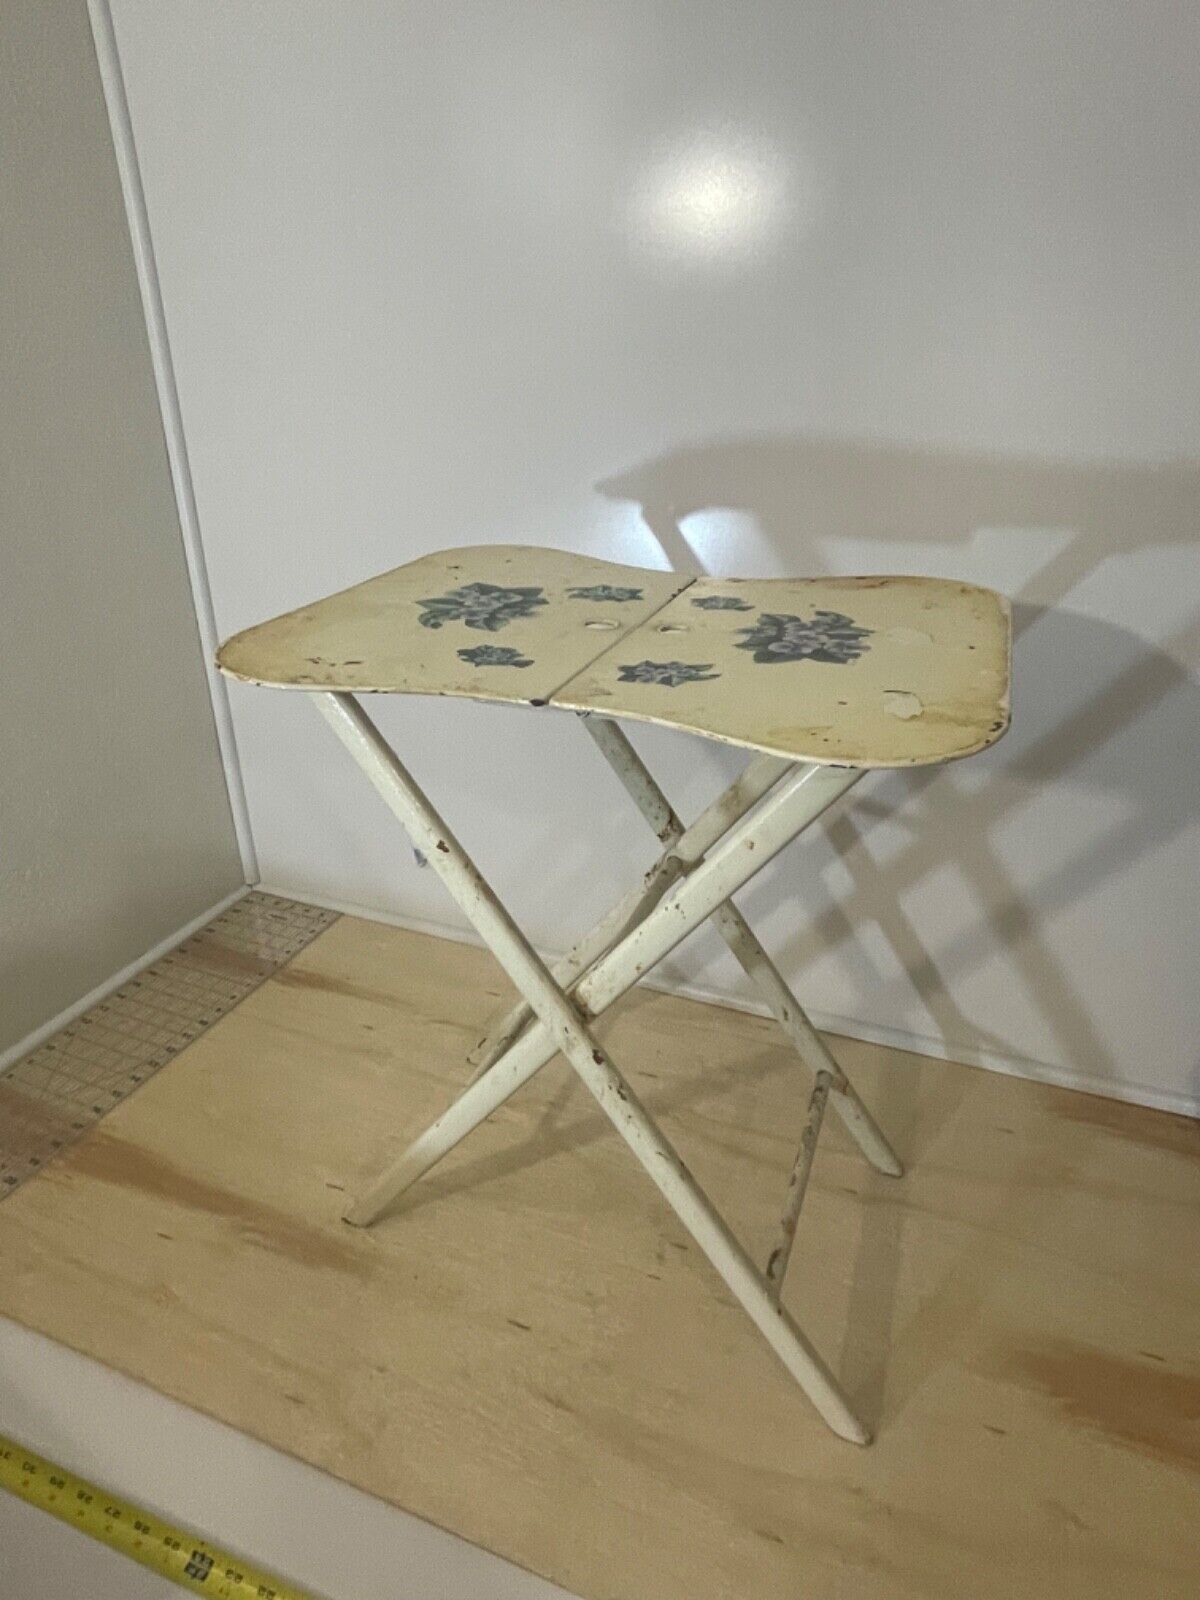 Vintage Mid-Century Folding Tray Table | Floral Lacquer | Distressed Used Look